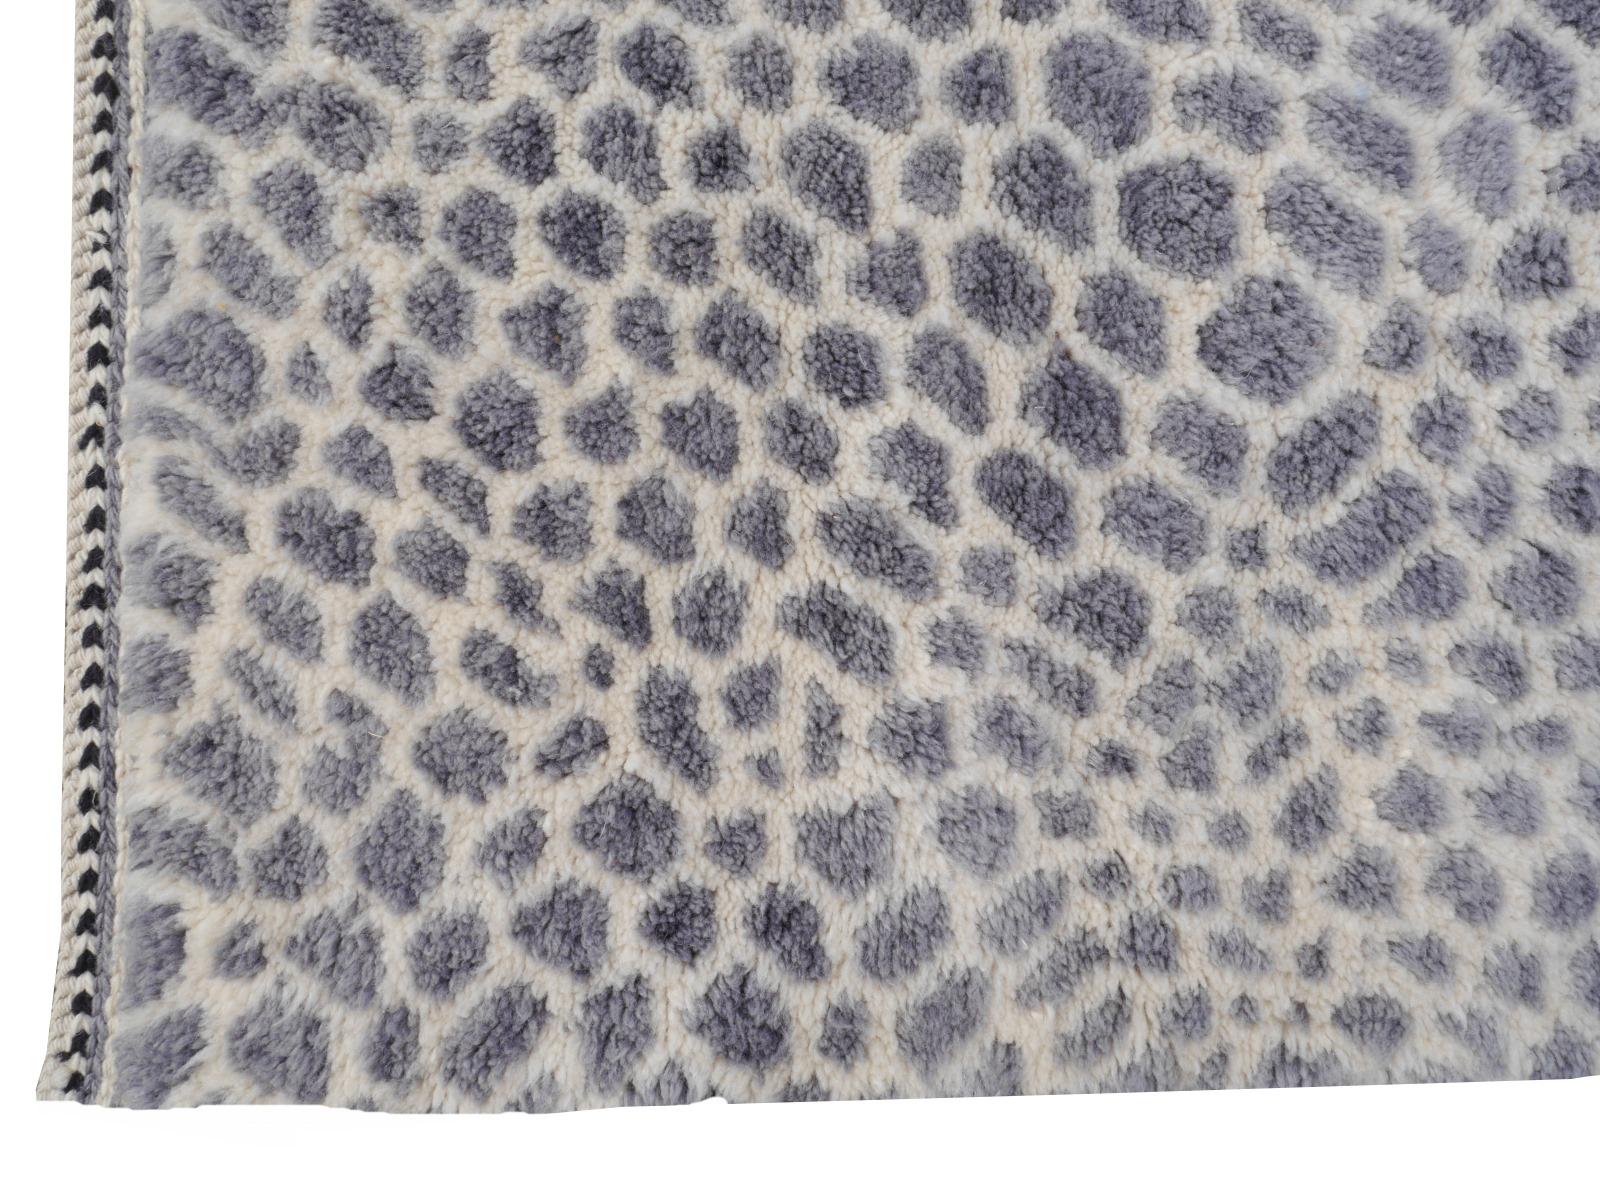 North African Moroccan Berber Rug Leopard Cheetah Design Soft Quality Gray Beige For Sale 1